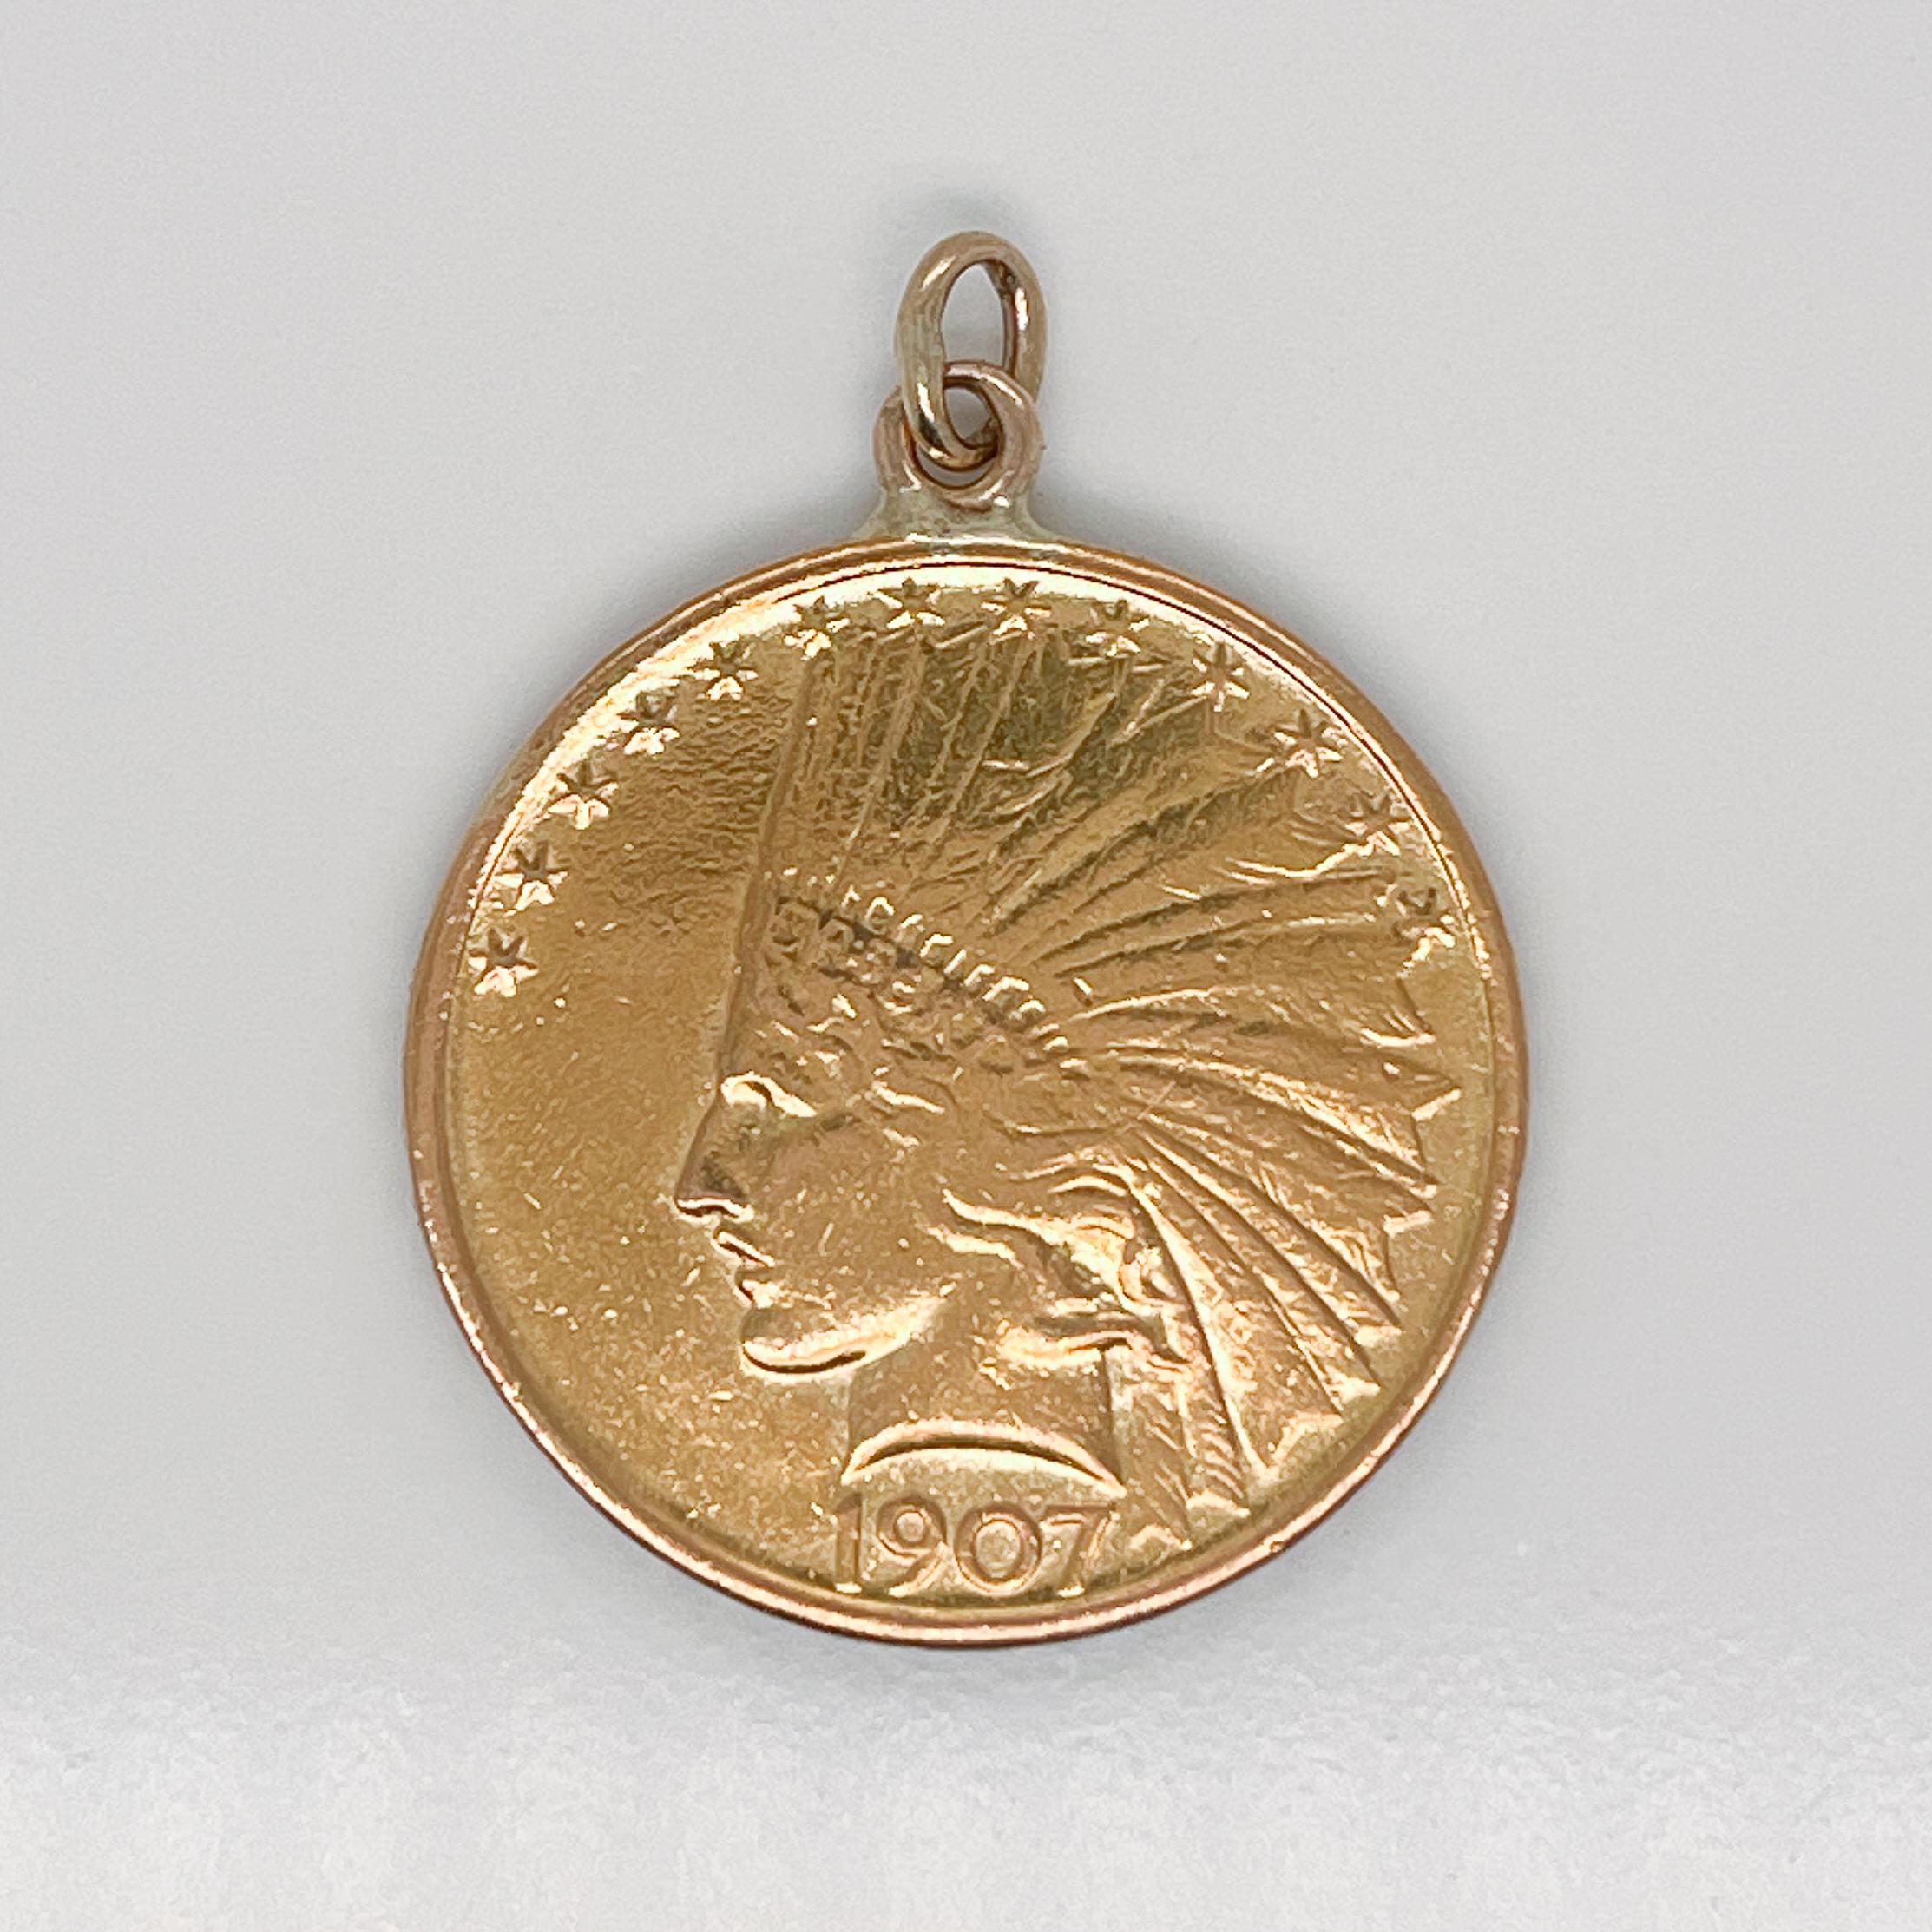 A very fine antique gold coin pendant.

Made from a $10 gold coin that dates to 1907.

Simply a wonderful Numismatic pendant - both a beautiful and amazing piece of history!

Date:
20th Century

Overall Condition:
It is in overall good, as-pictured,